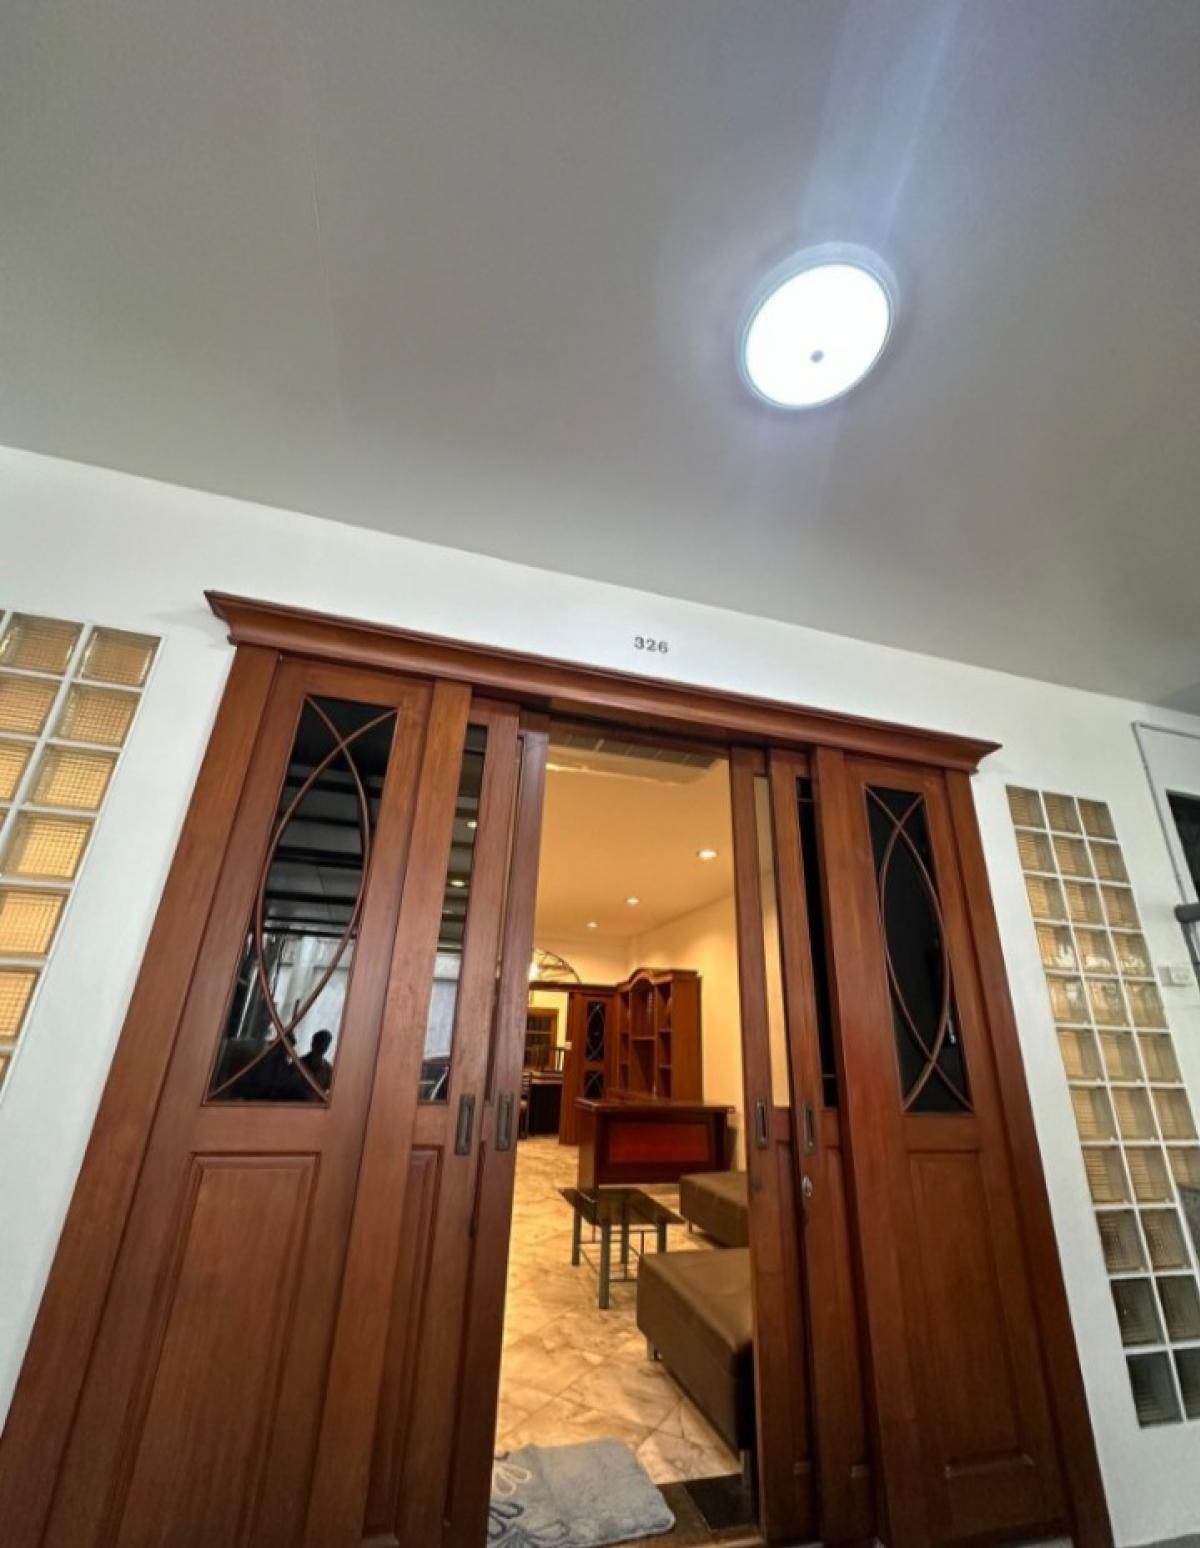 For RentTownhousePinklao, Charansanitwong : CL 1102💥Townhouse for rent, 3 storeys, ready to move in, with furniture, near Central Pinklao. Just carry your bag and move in. There are many entrances and exits. Borommaratchachonnani, Bang Bamru Subdistrict, Bang Phlat District, Bangkok 10700